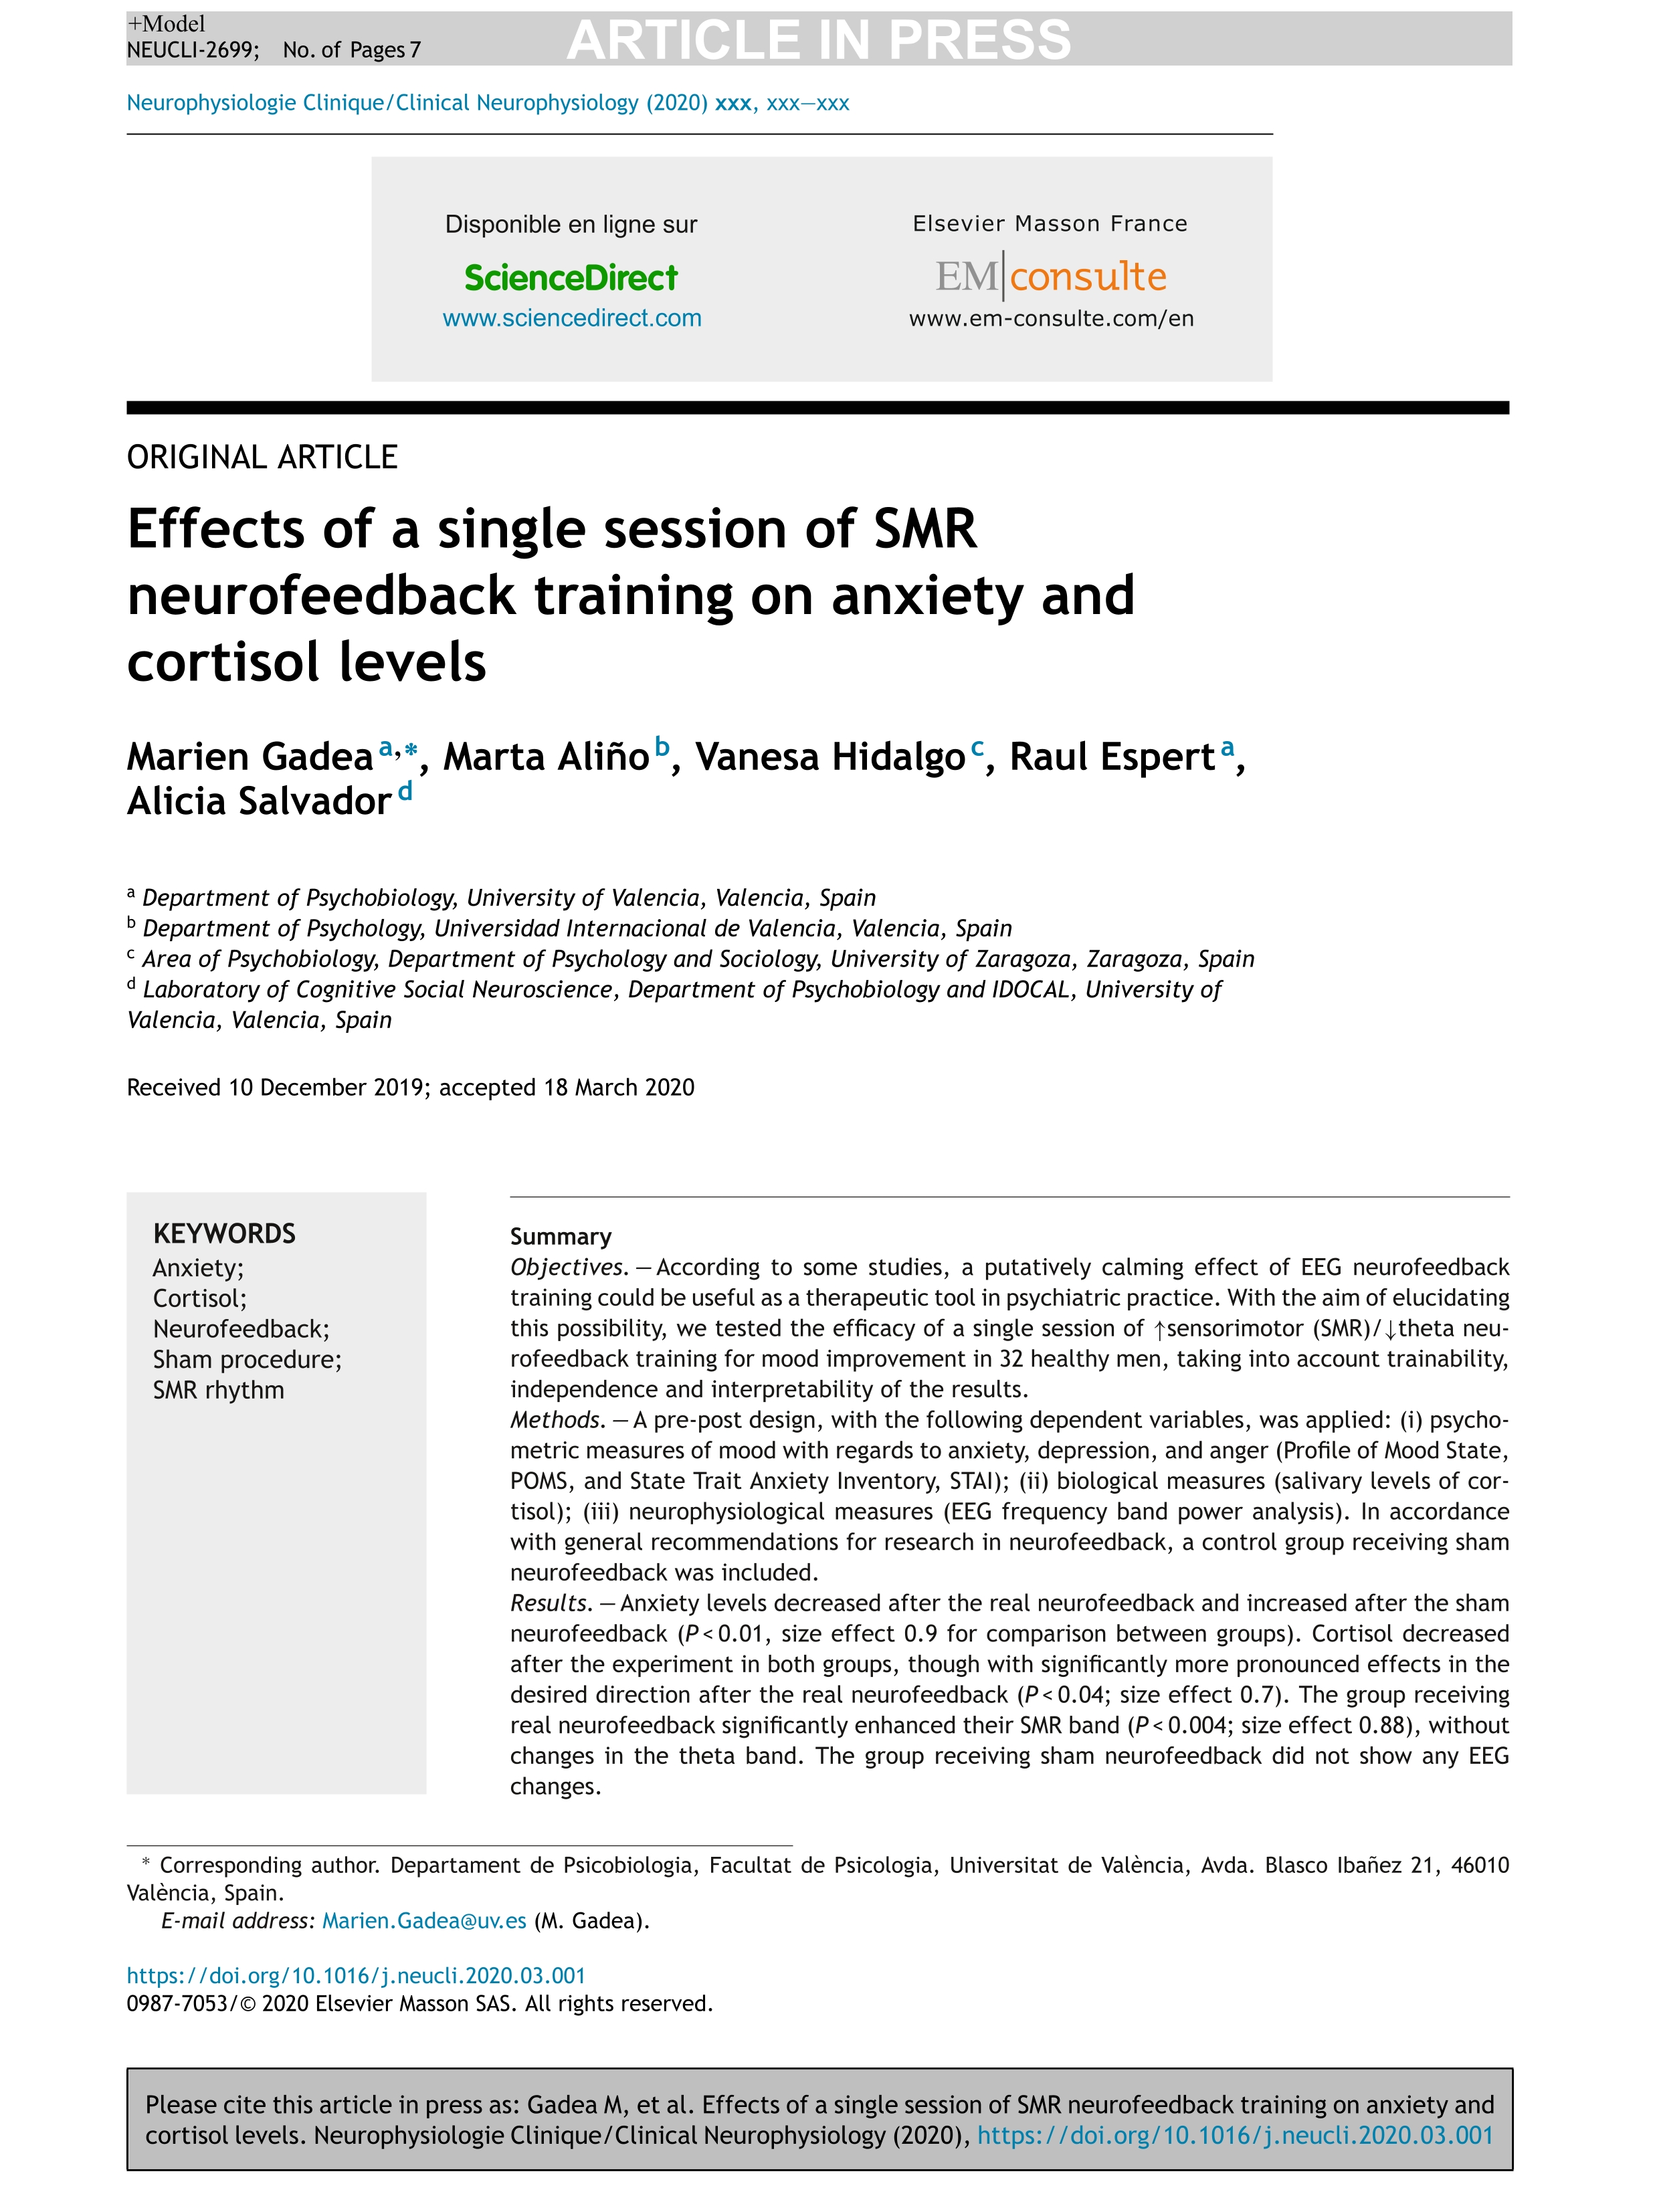 Effects of a single session of SMR neurofeedback training on anxiety and cortisol levels